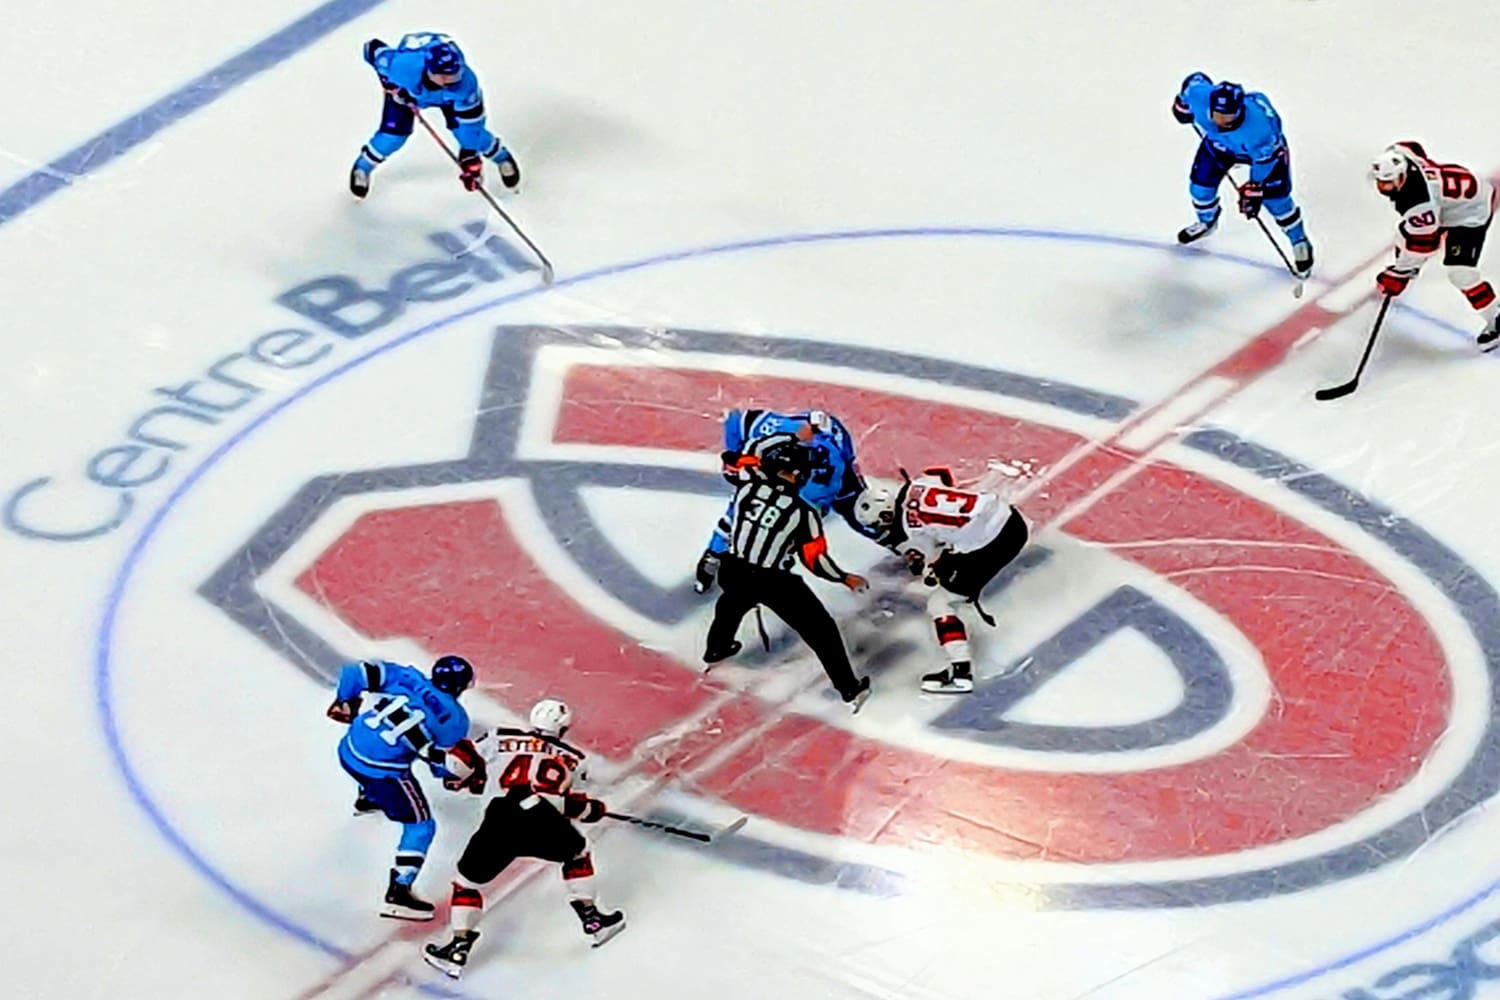 The Puck Drop Line Brawl: Looking back at the Devils-Rangers Fight